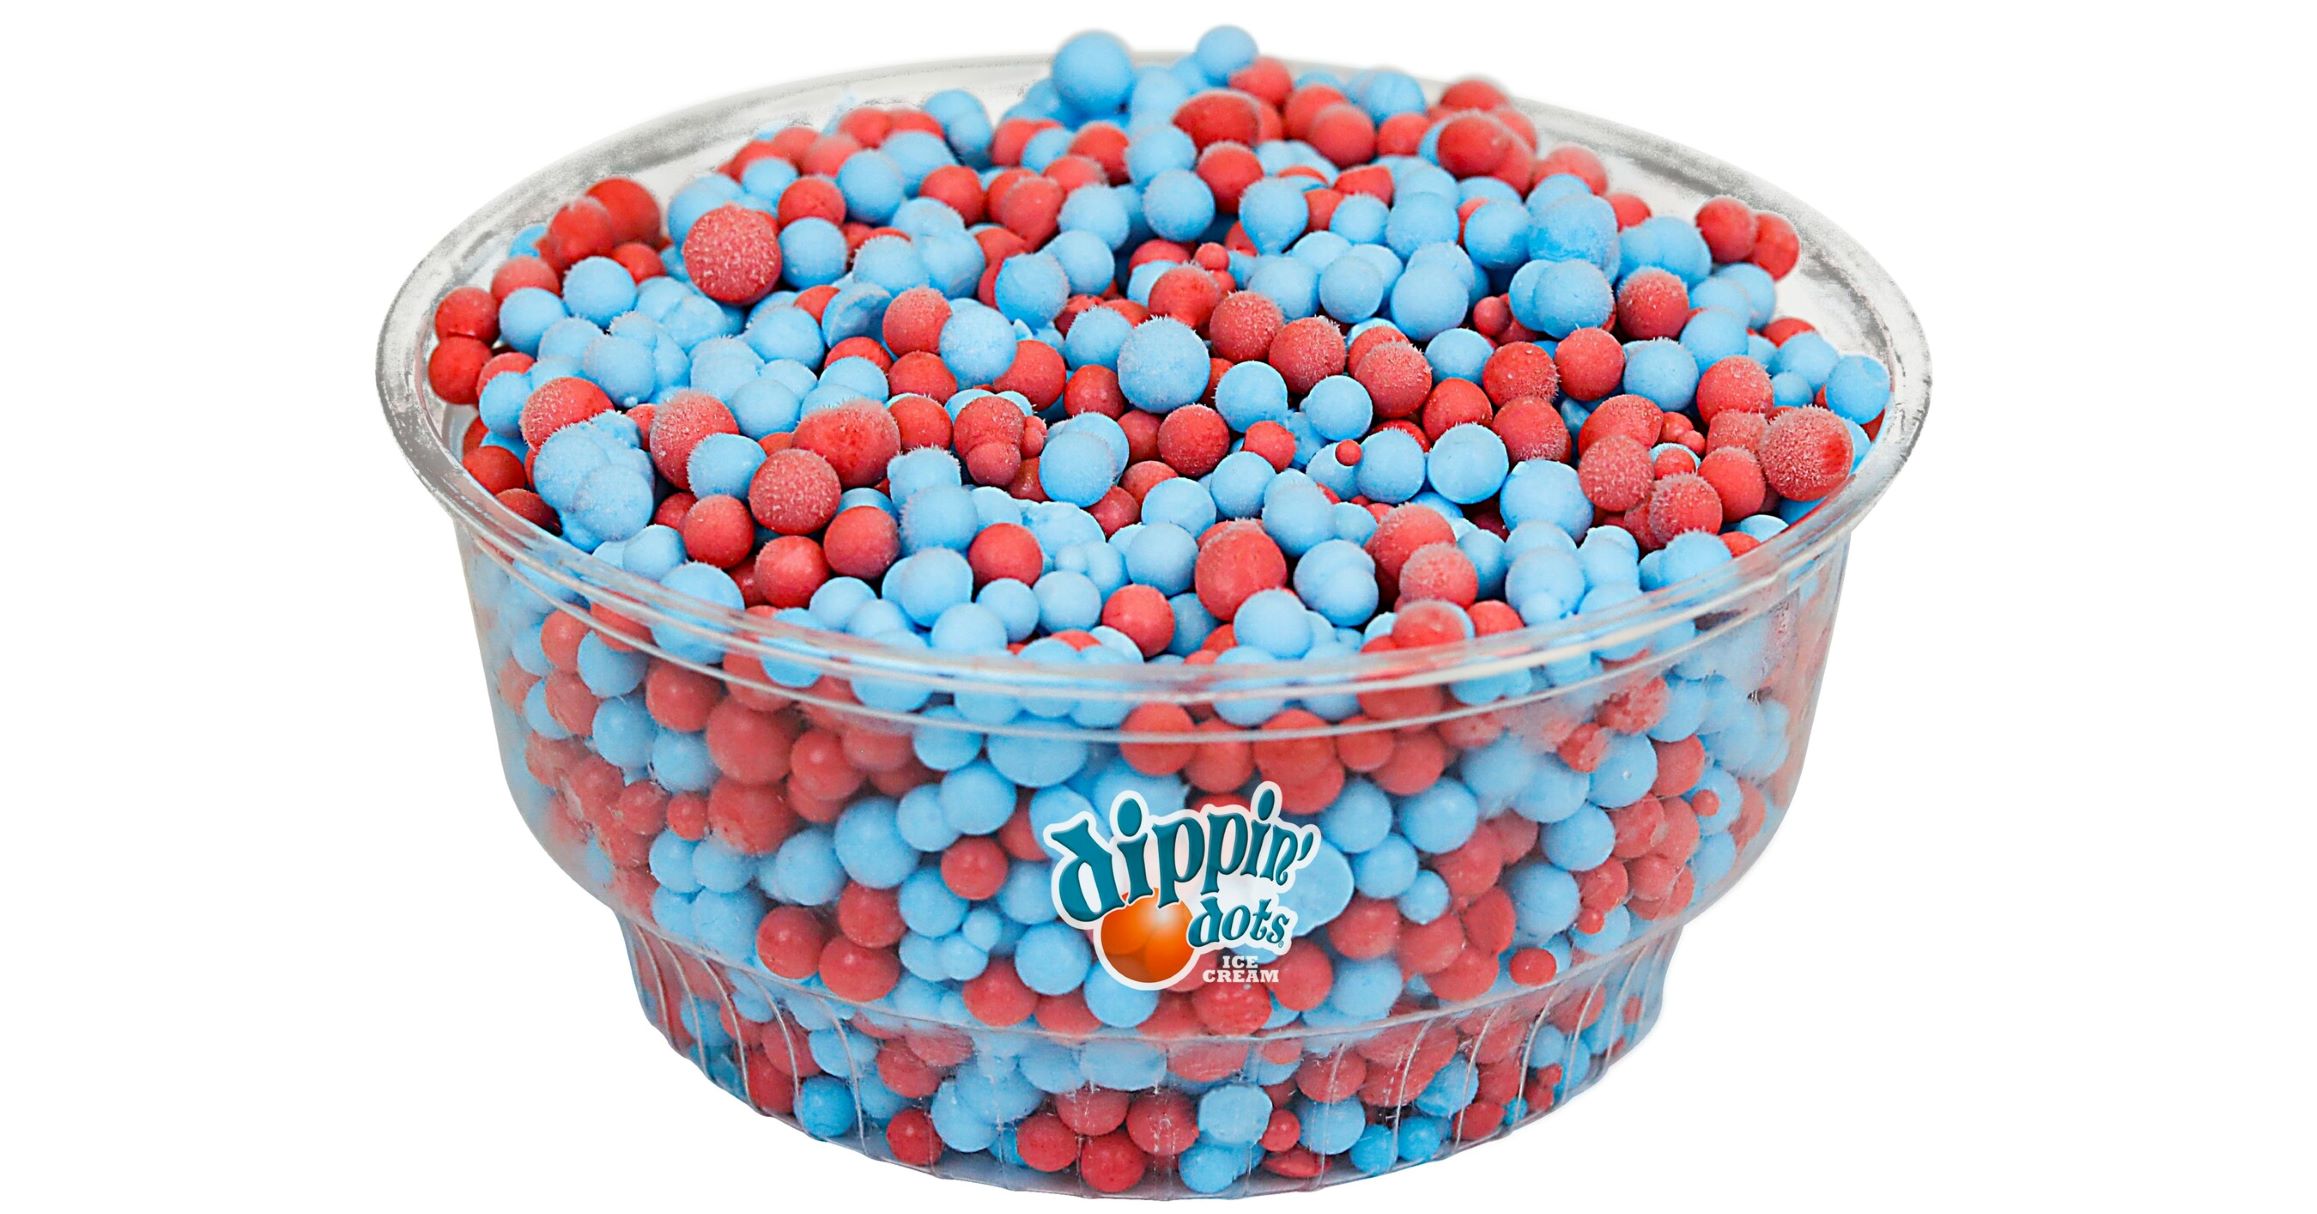 10-dippin-dots-nutrition-facts